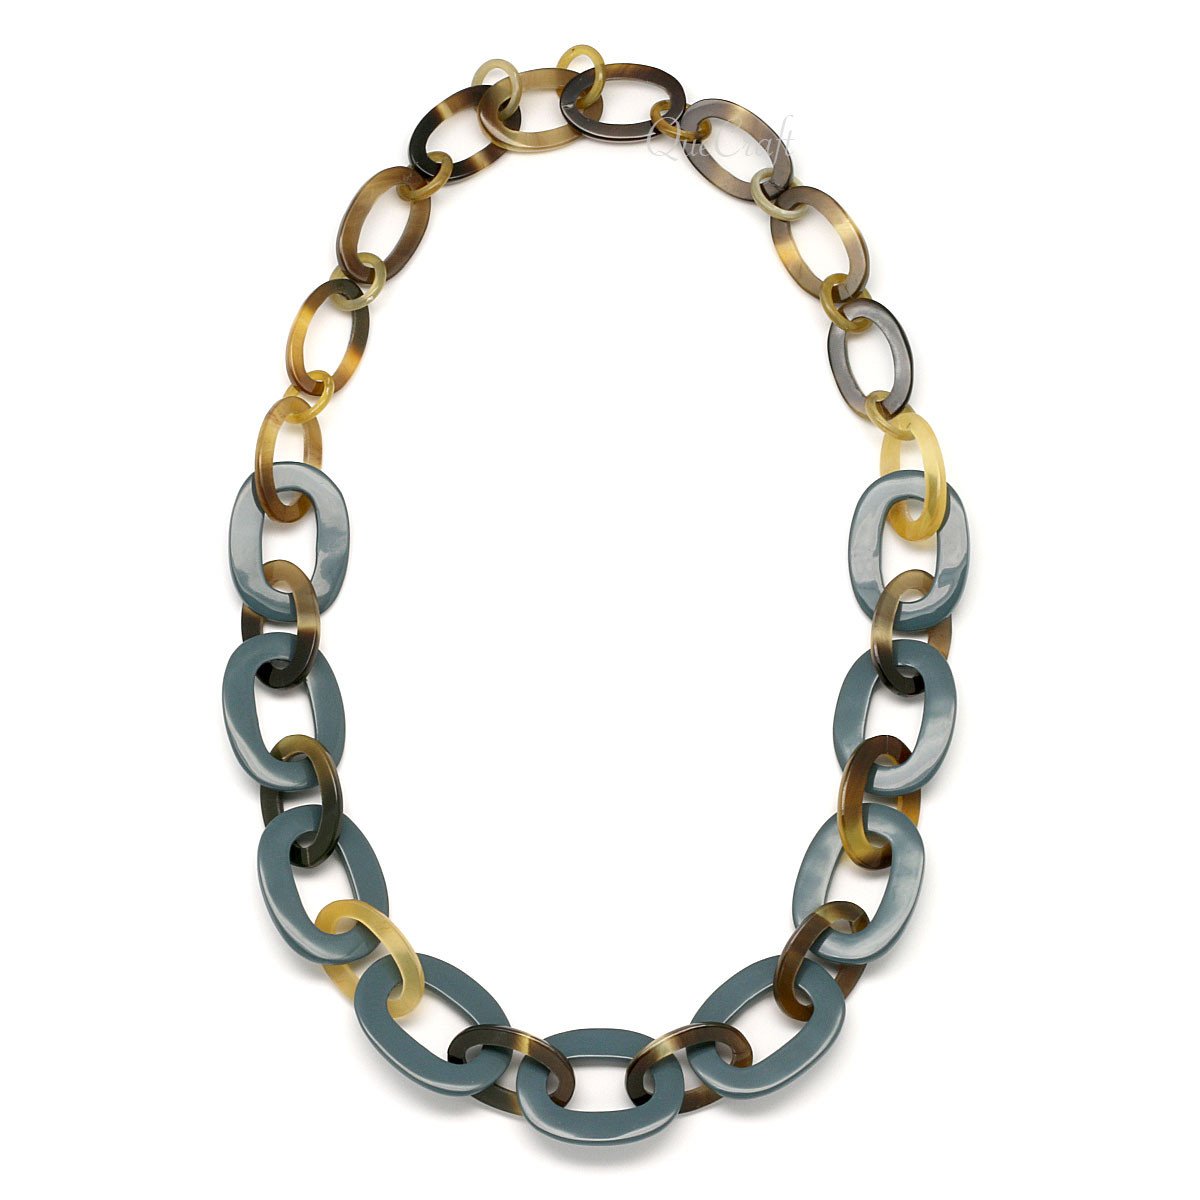 Horn & Lacquer Chain Necklace #4392 - HORN JEWELRY